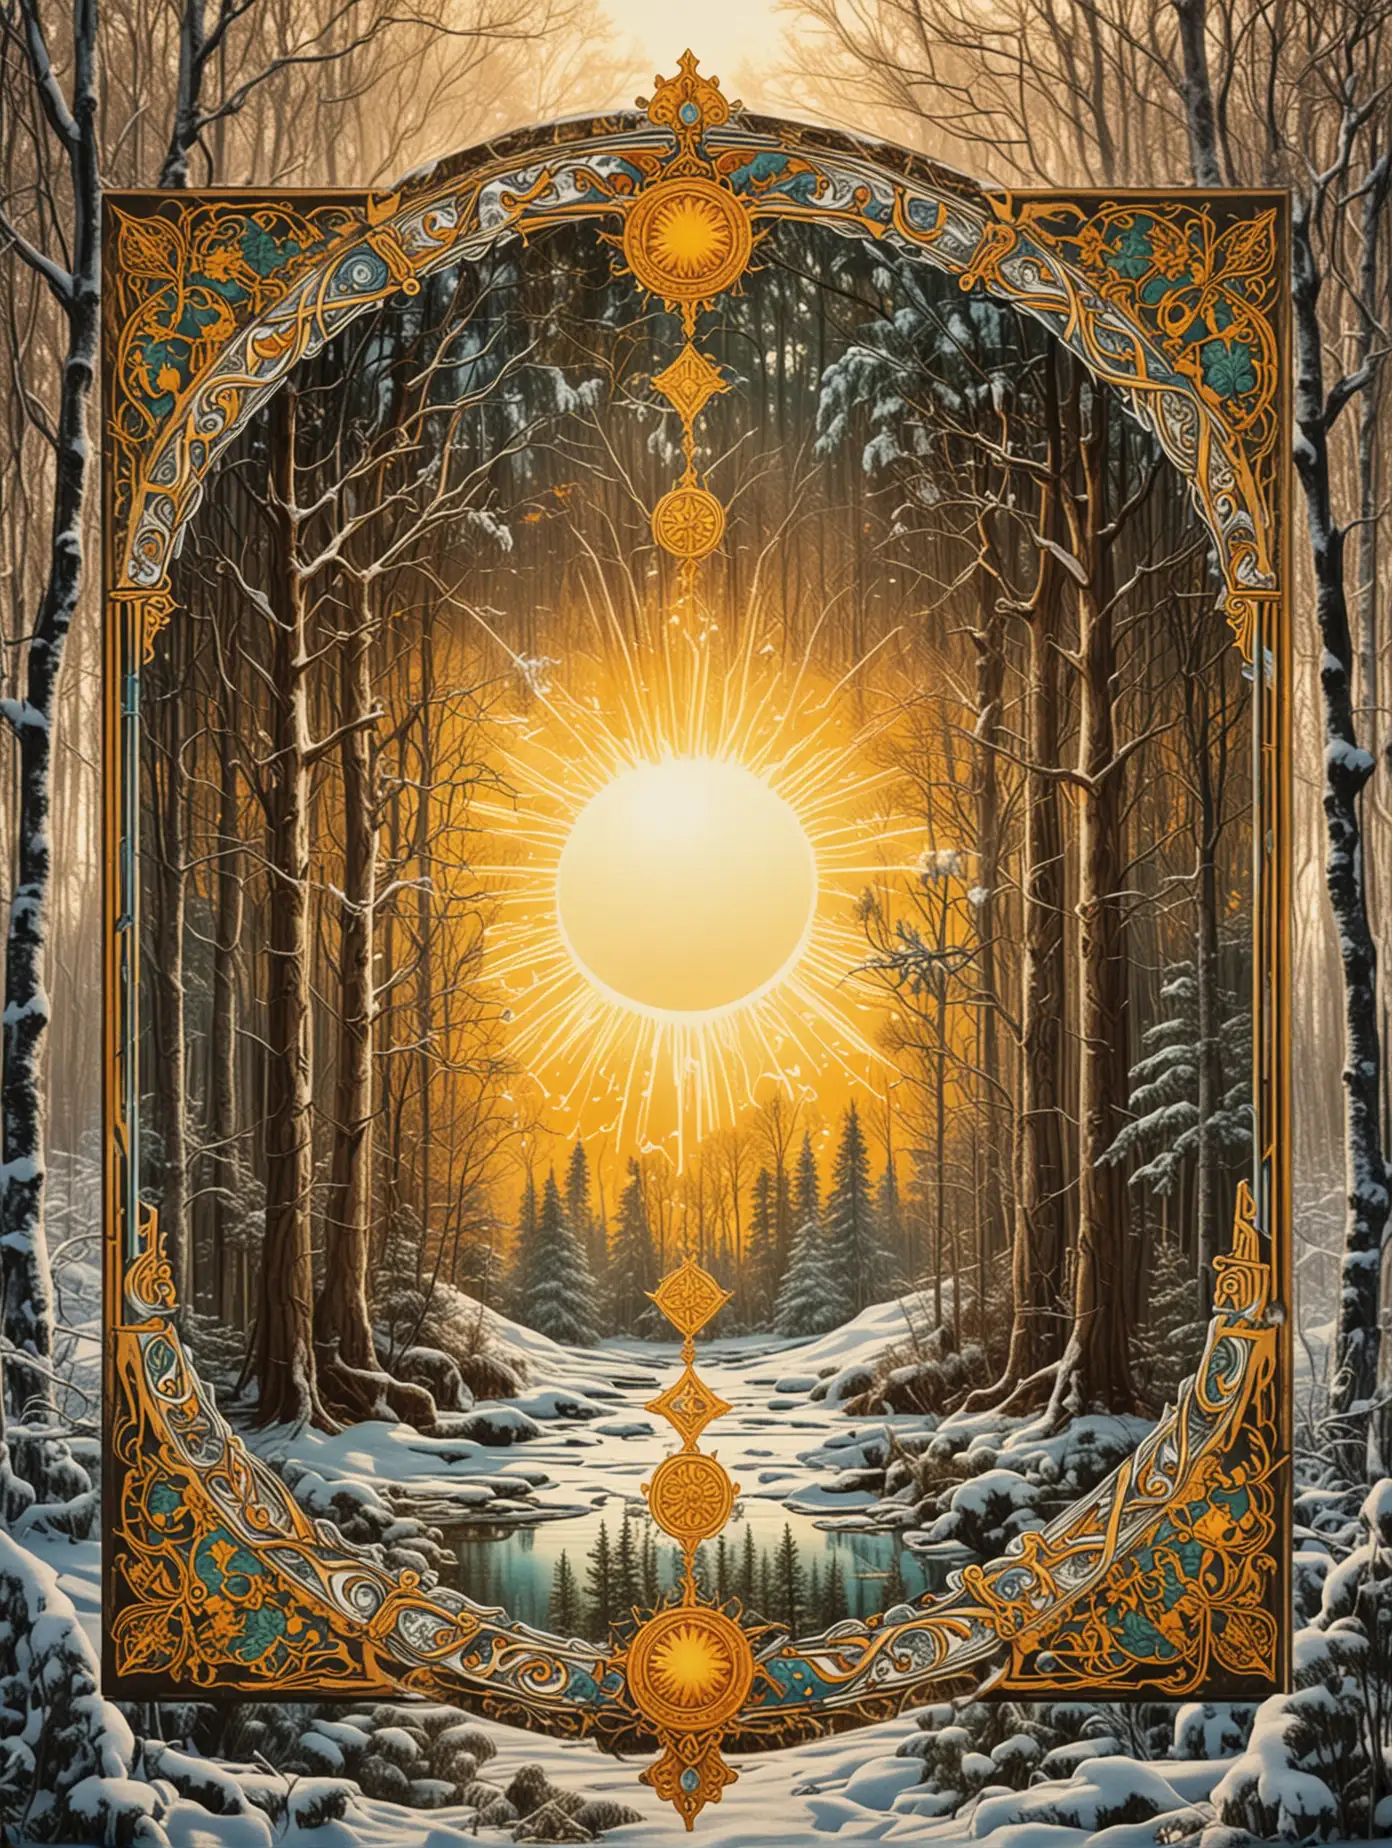 Slavic-Style-Tarot-Card-with-Bright-Sun-Above-Winter-Forest